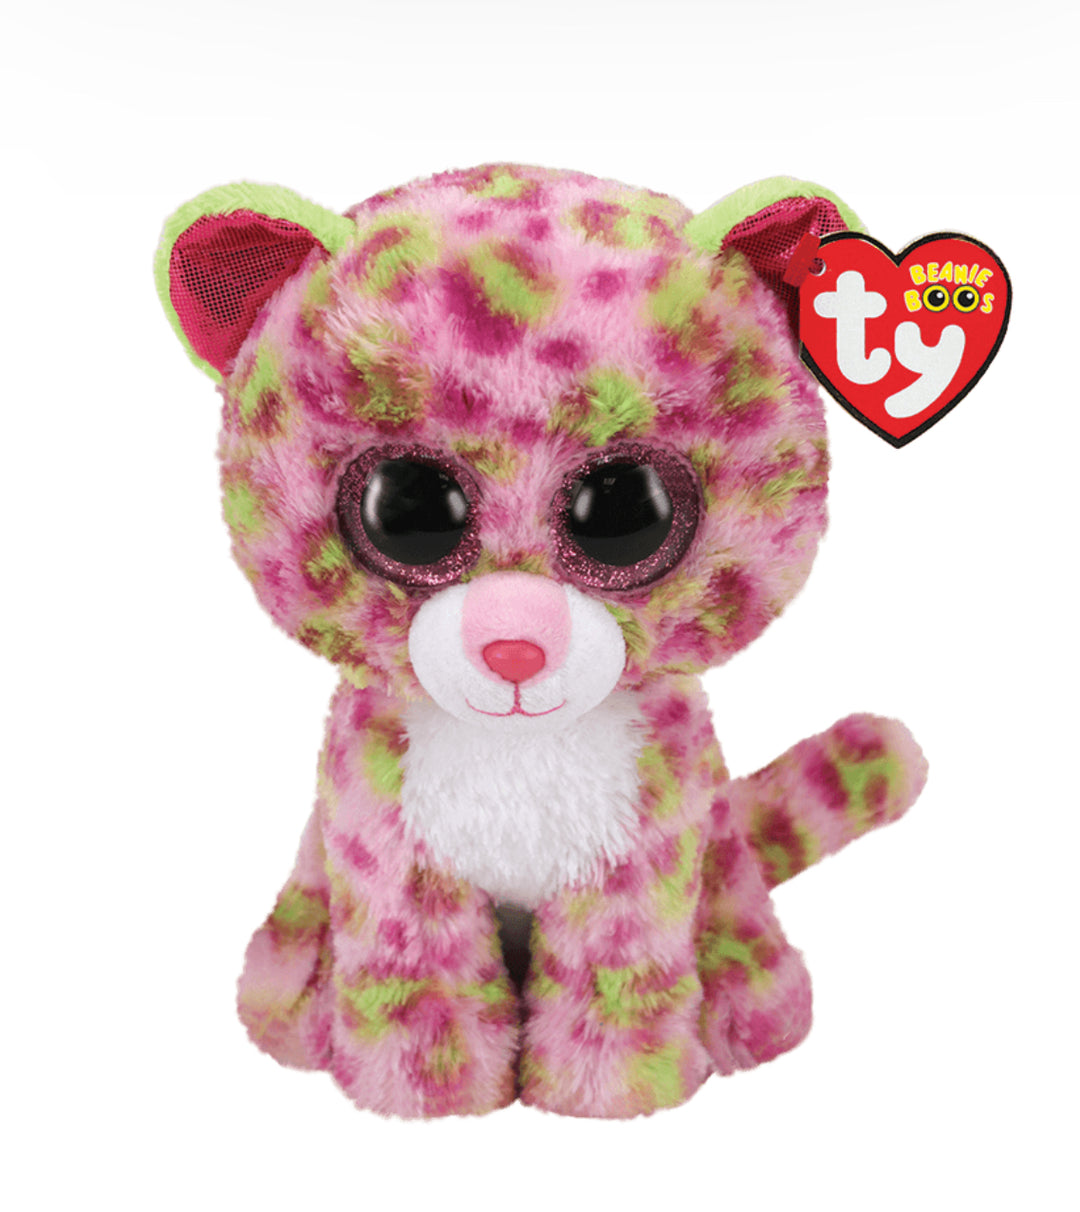 TY Beanie Boos Stuffed Animal, Lainey-240 Kids-Inspired by Justeen-Women's Clothing Boutique in Chicago, Illinois